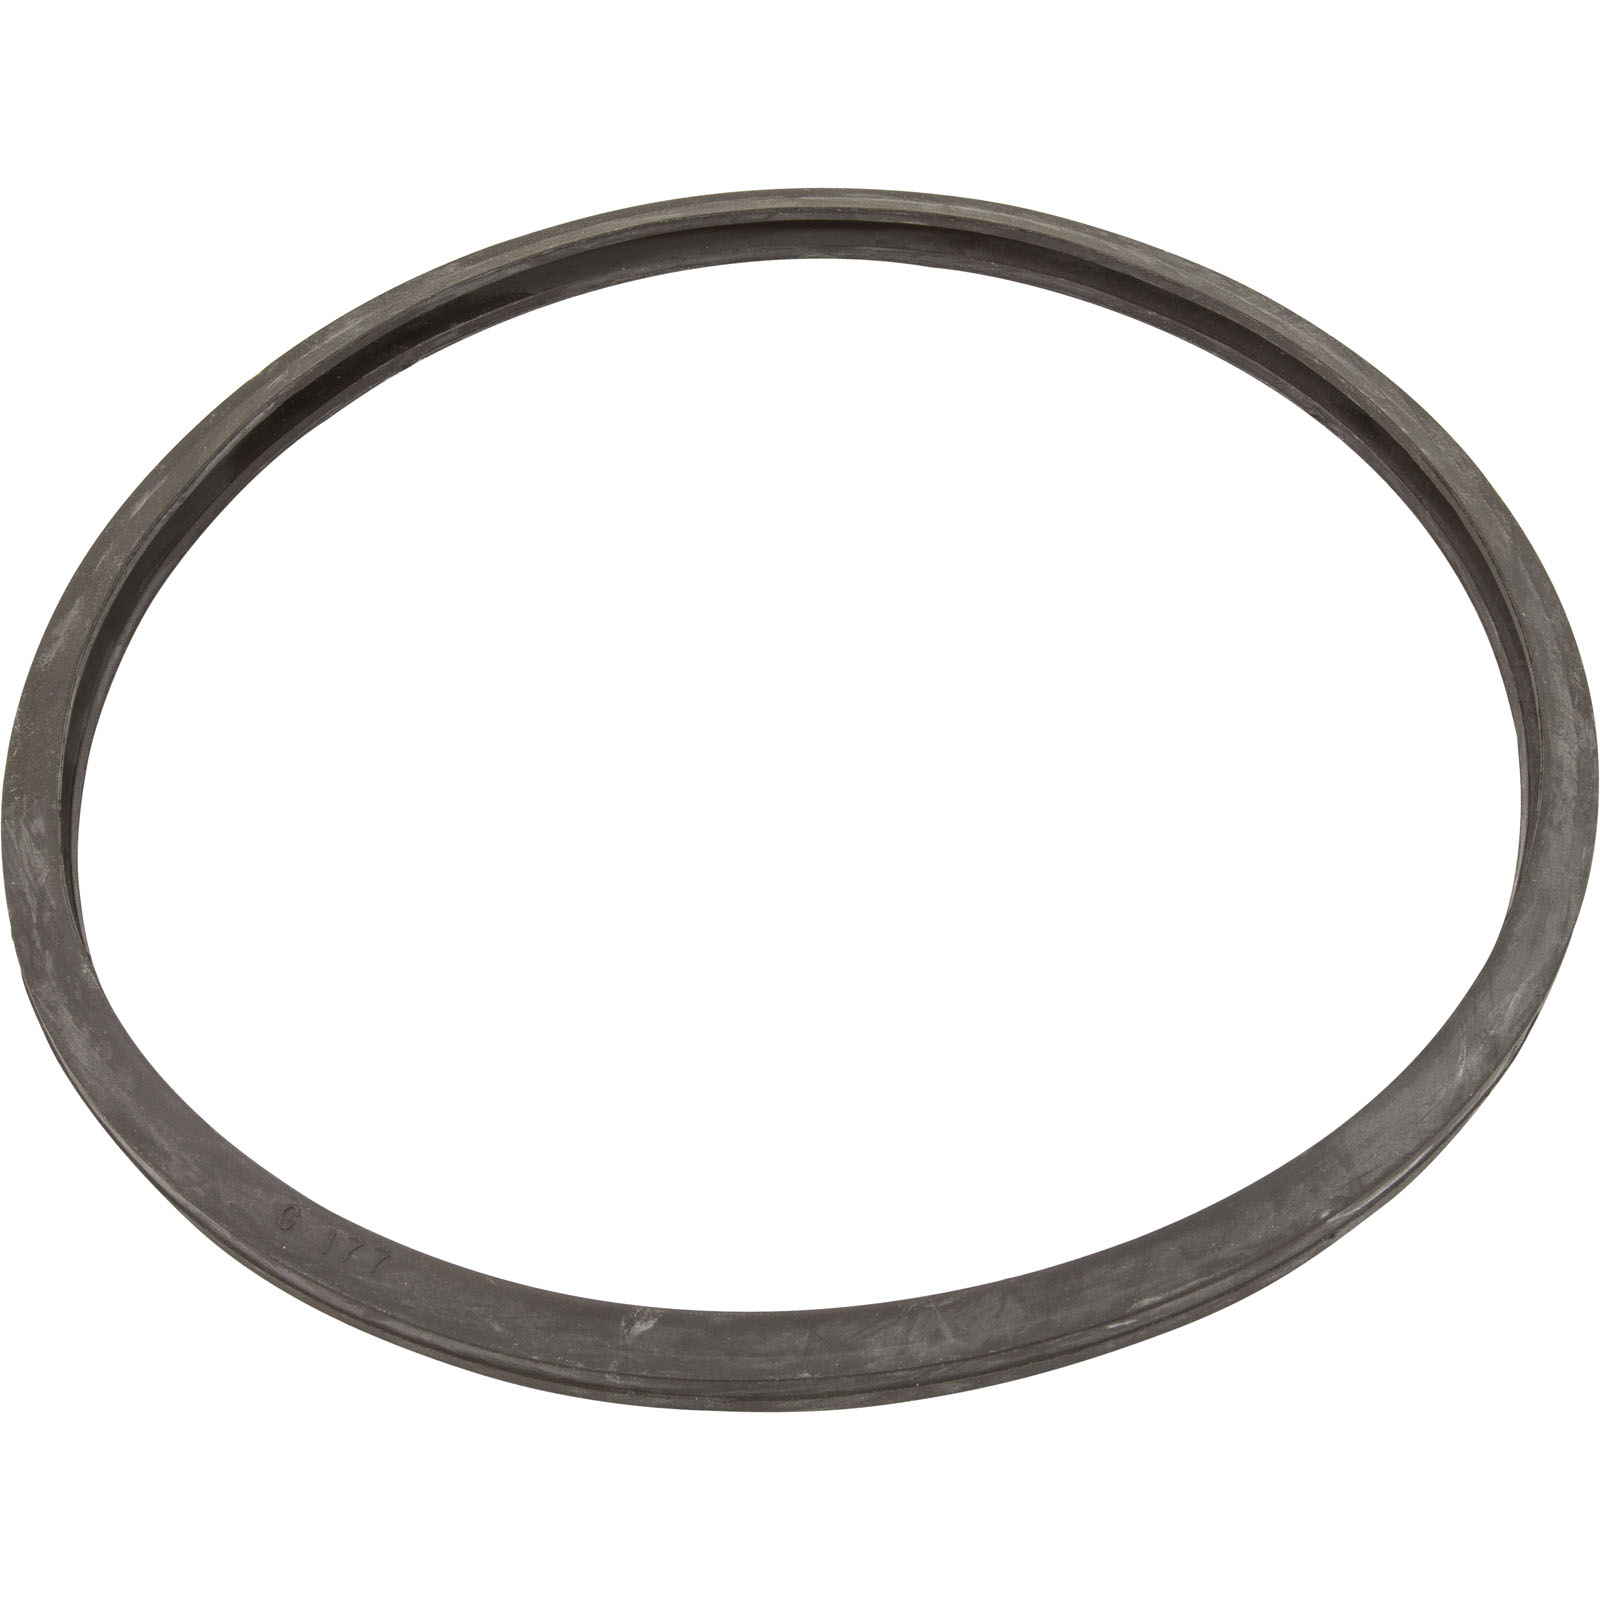 Picture of G-177 Gasket Baker Hydro HRV15B0069/10276/70101Lid Generic